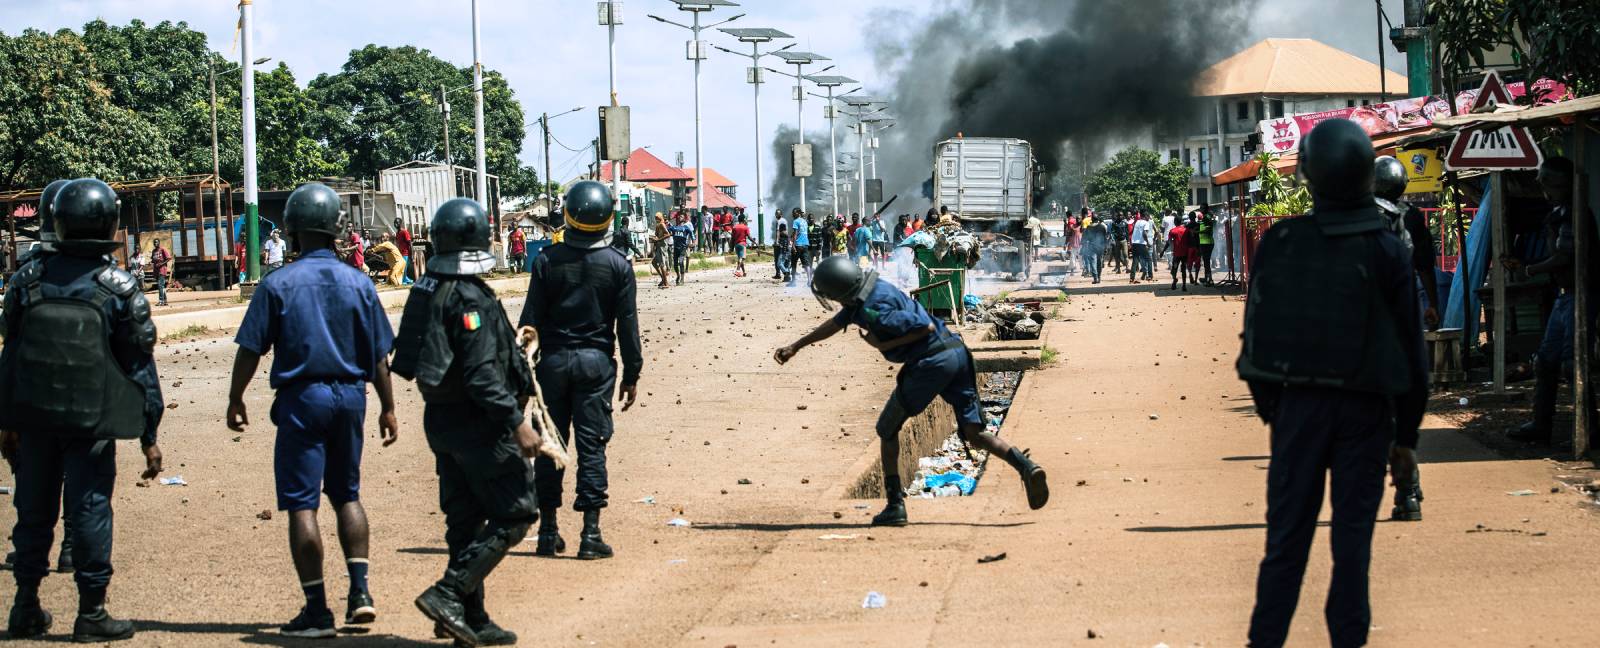 A police officer throws a stone at demonstrators during a protest in Conakry, Guinea. (Photo: John Wessels/AFP)